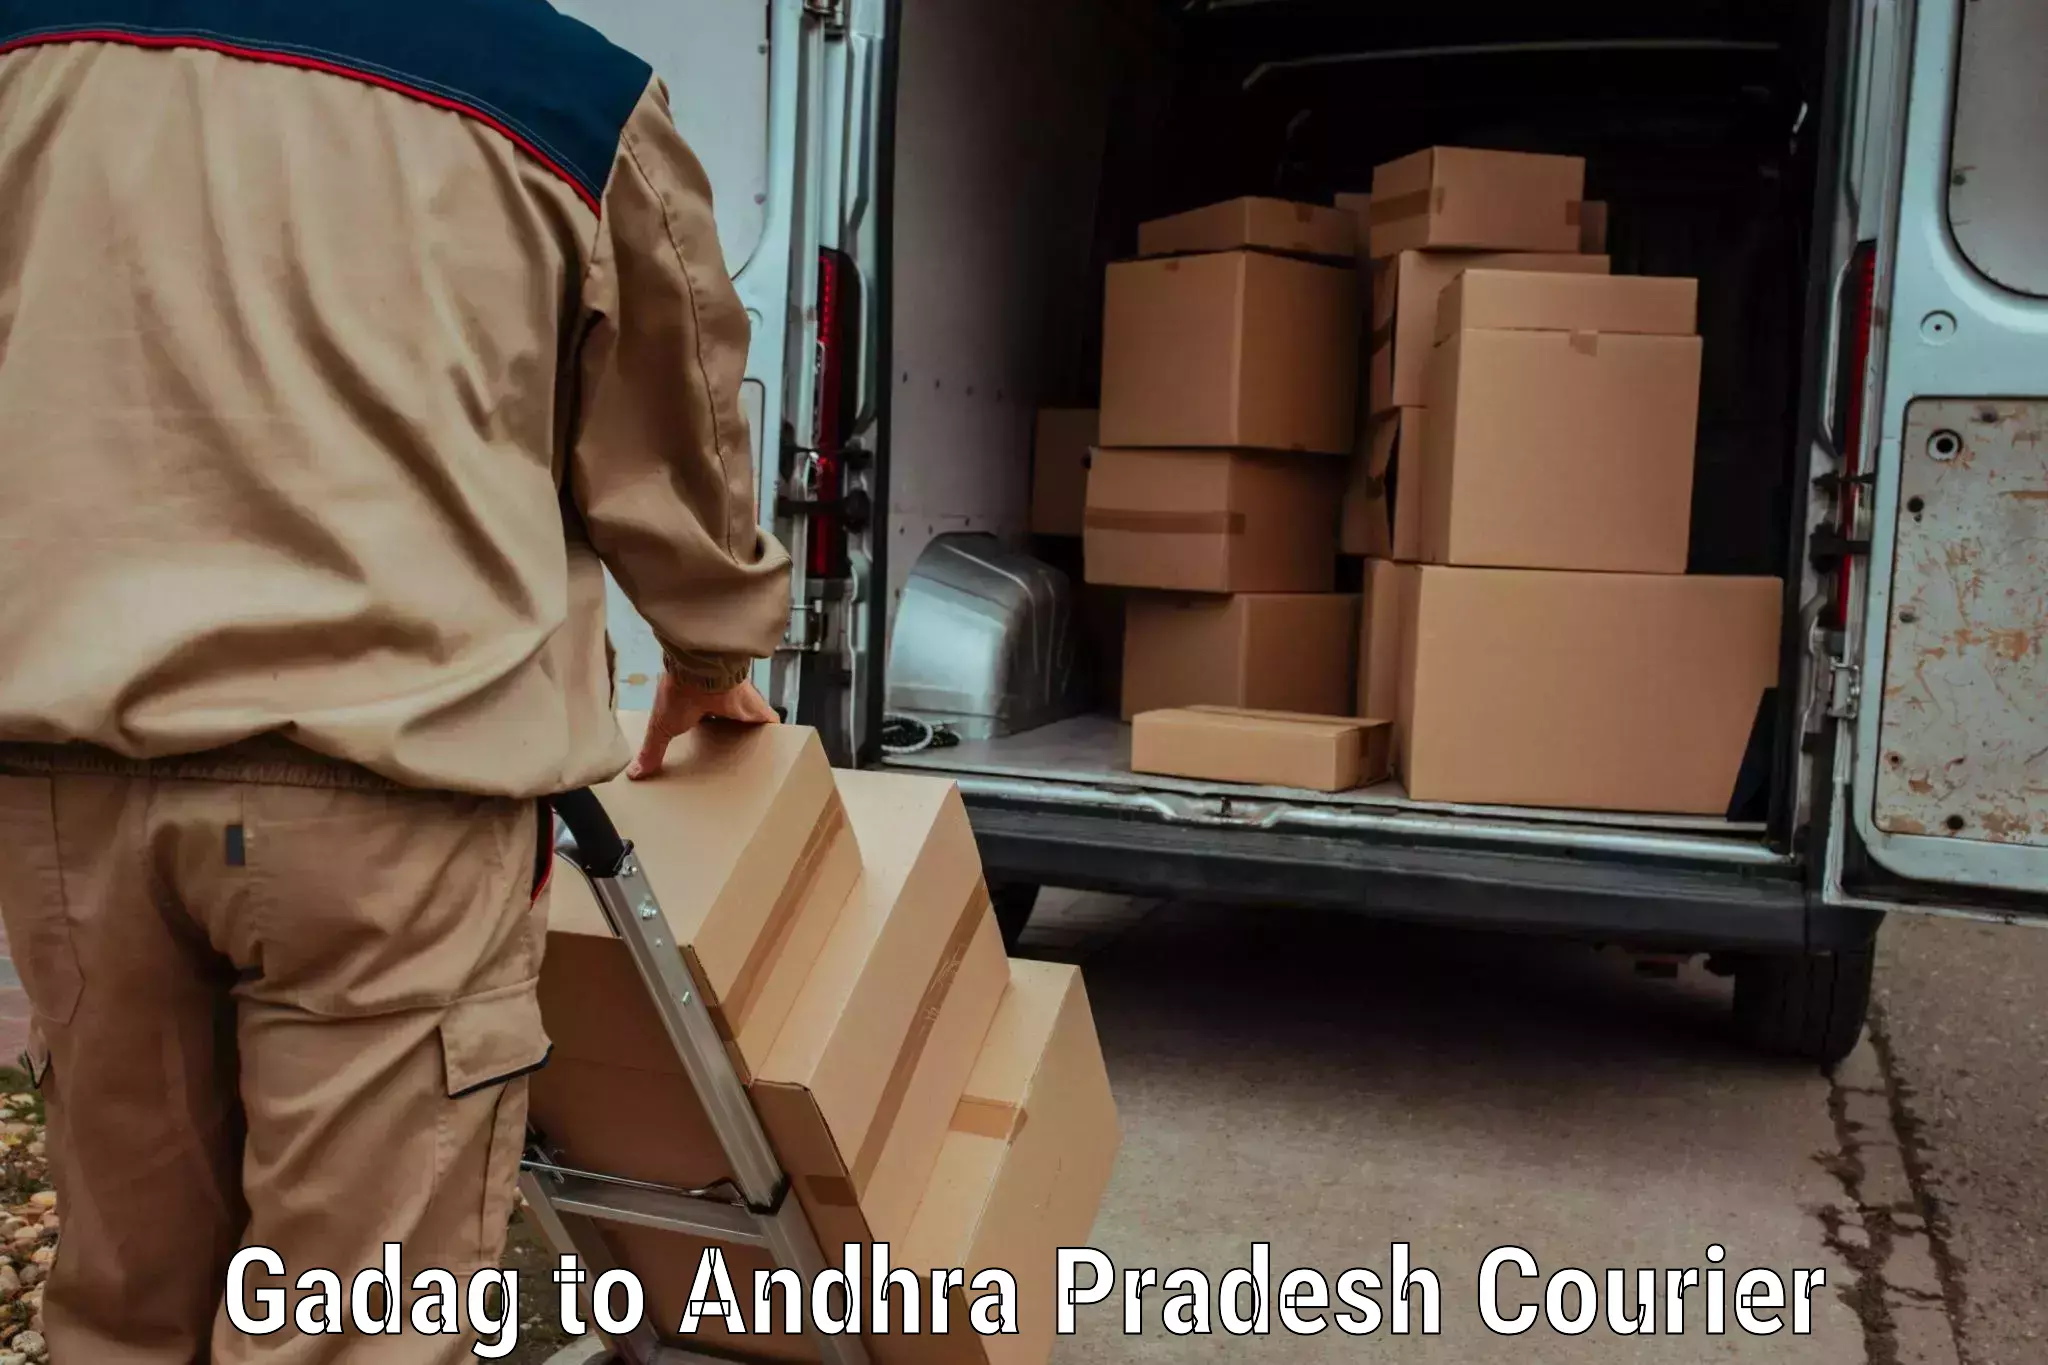 Global courier networks Gadag to Nallajerla